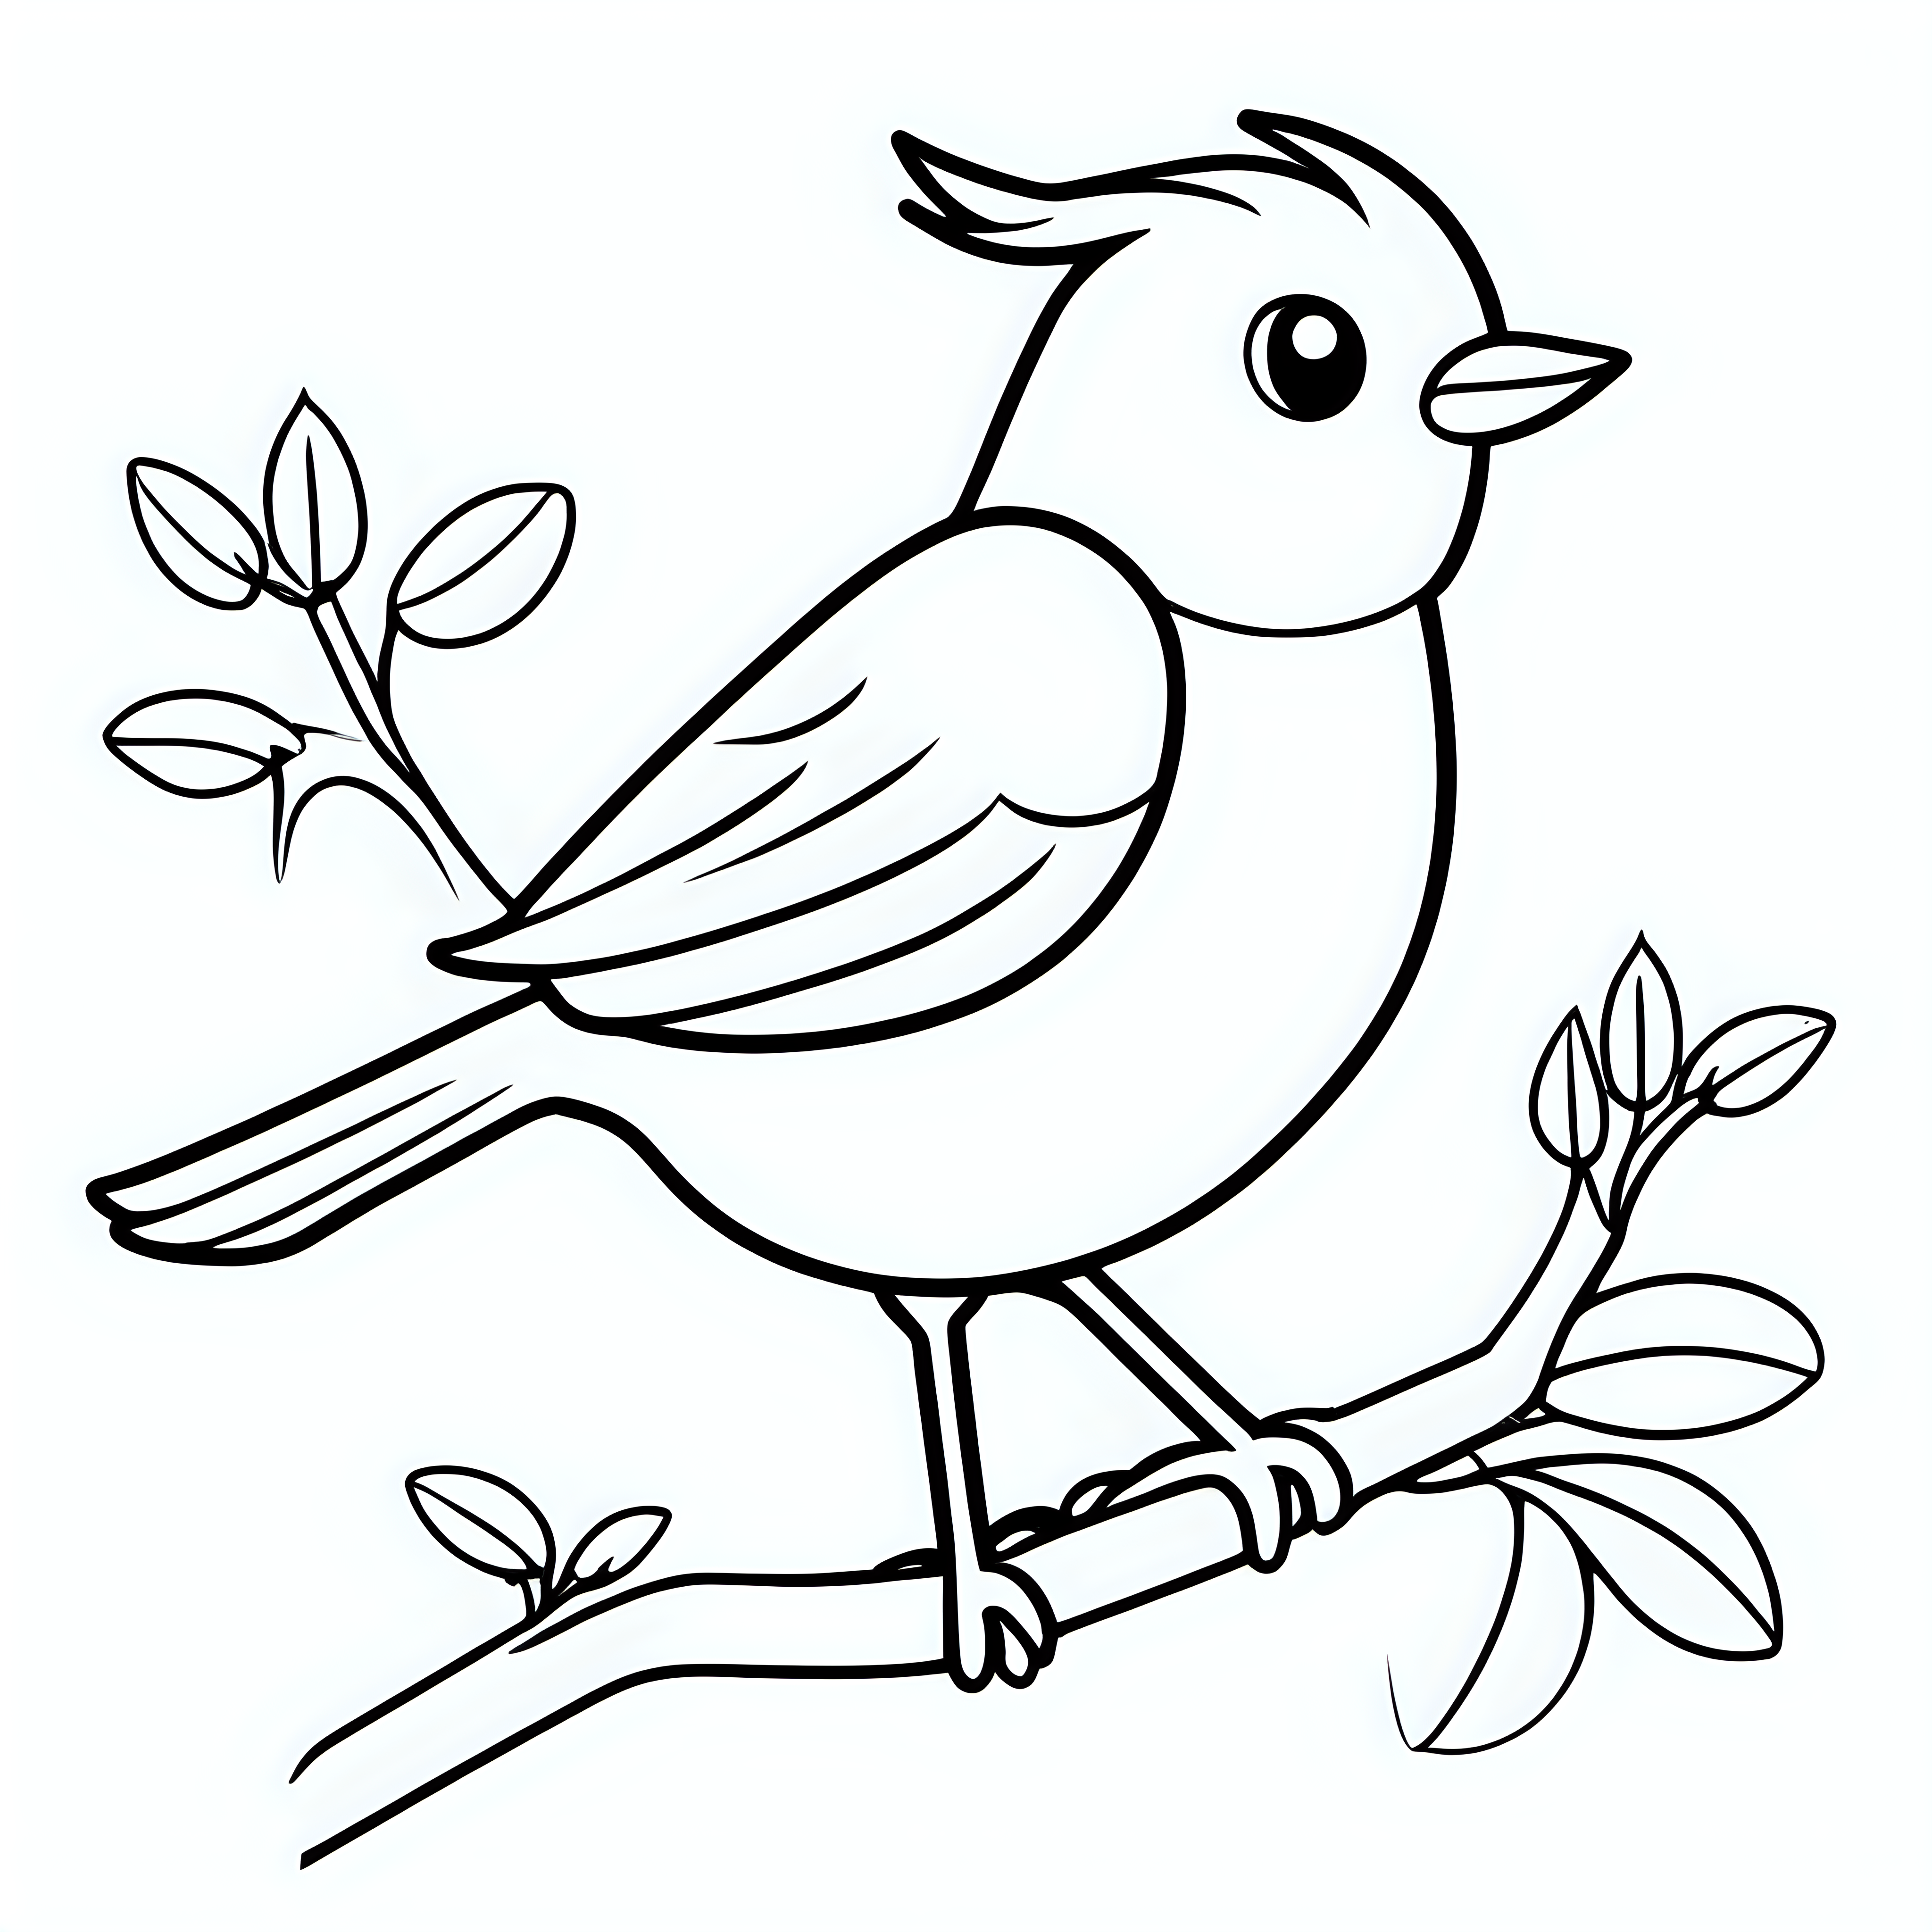 draw a cute bird with only the outline in black for a coloring book for kids